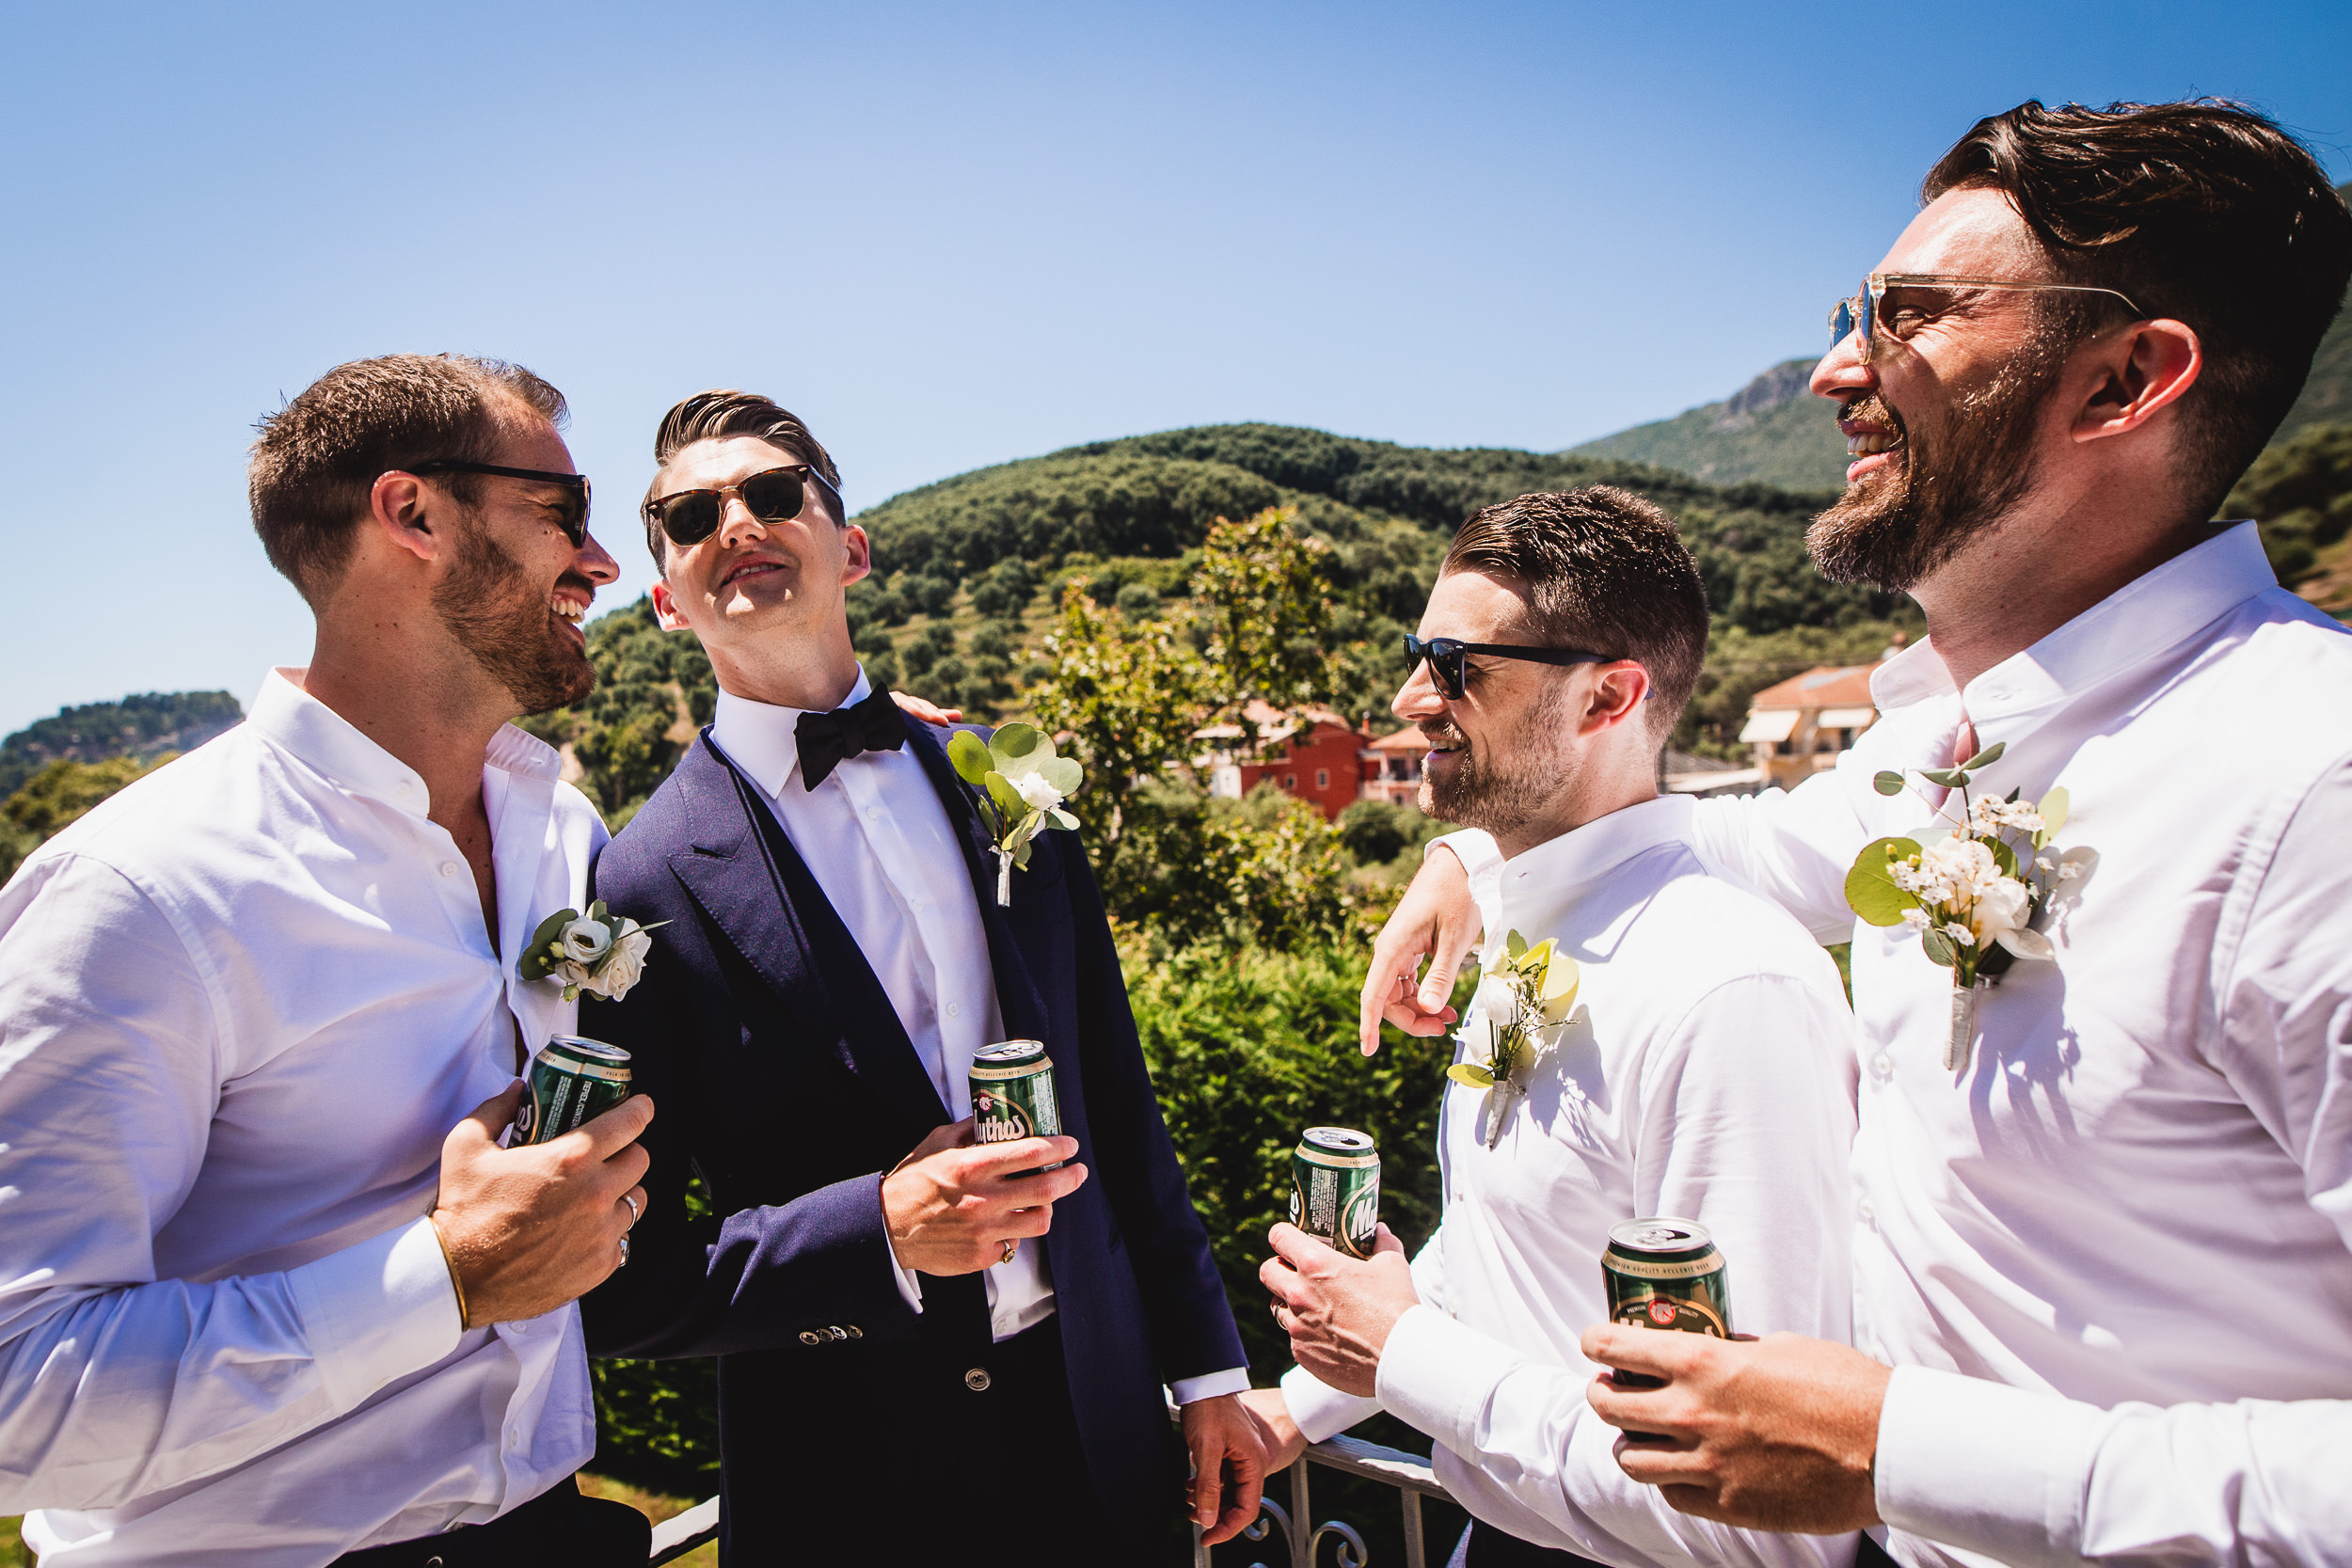 Groomsmen celebrating with beer on a balcony during a wedding.